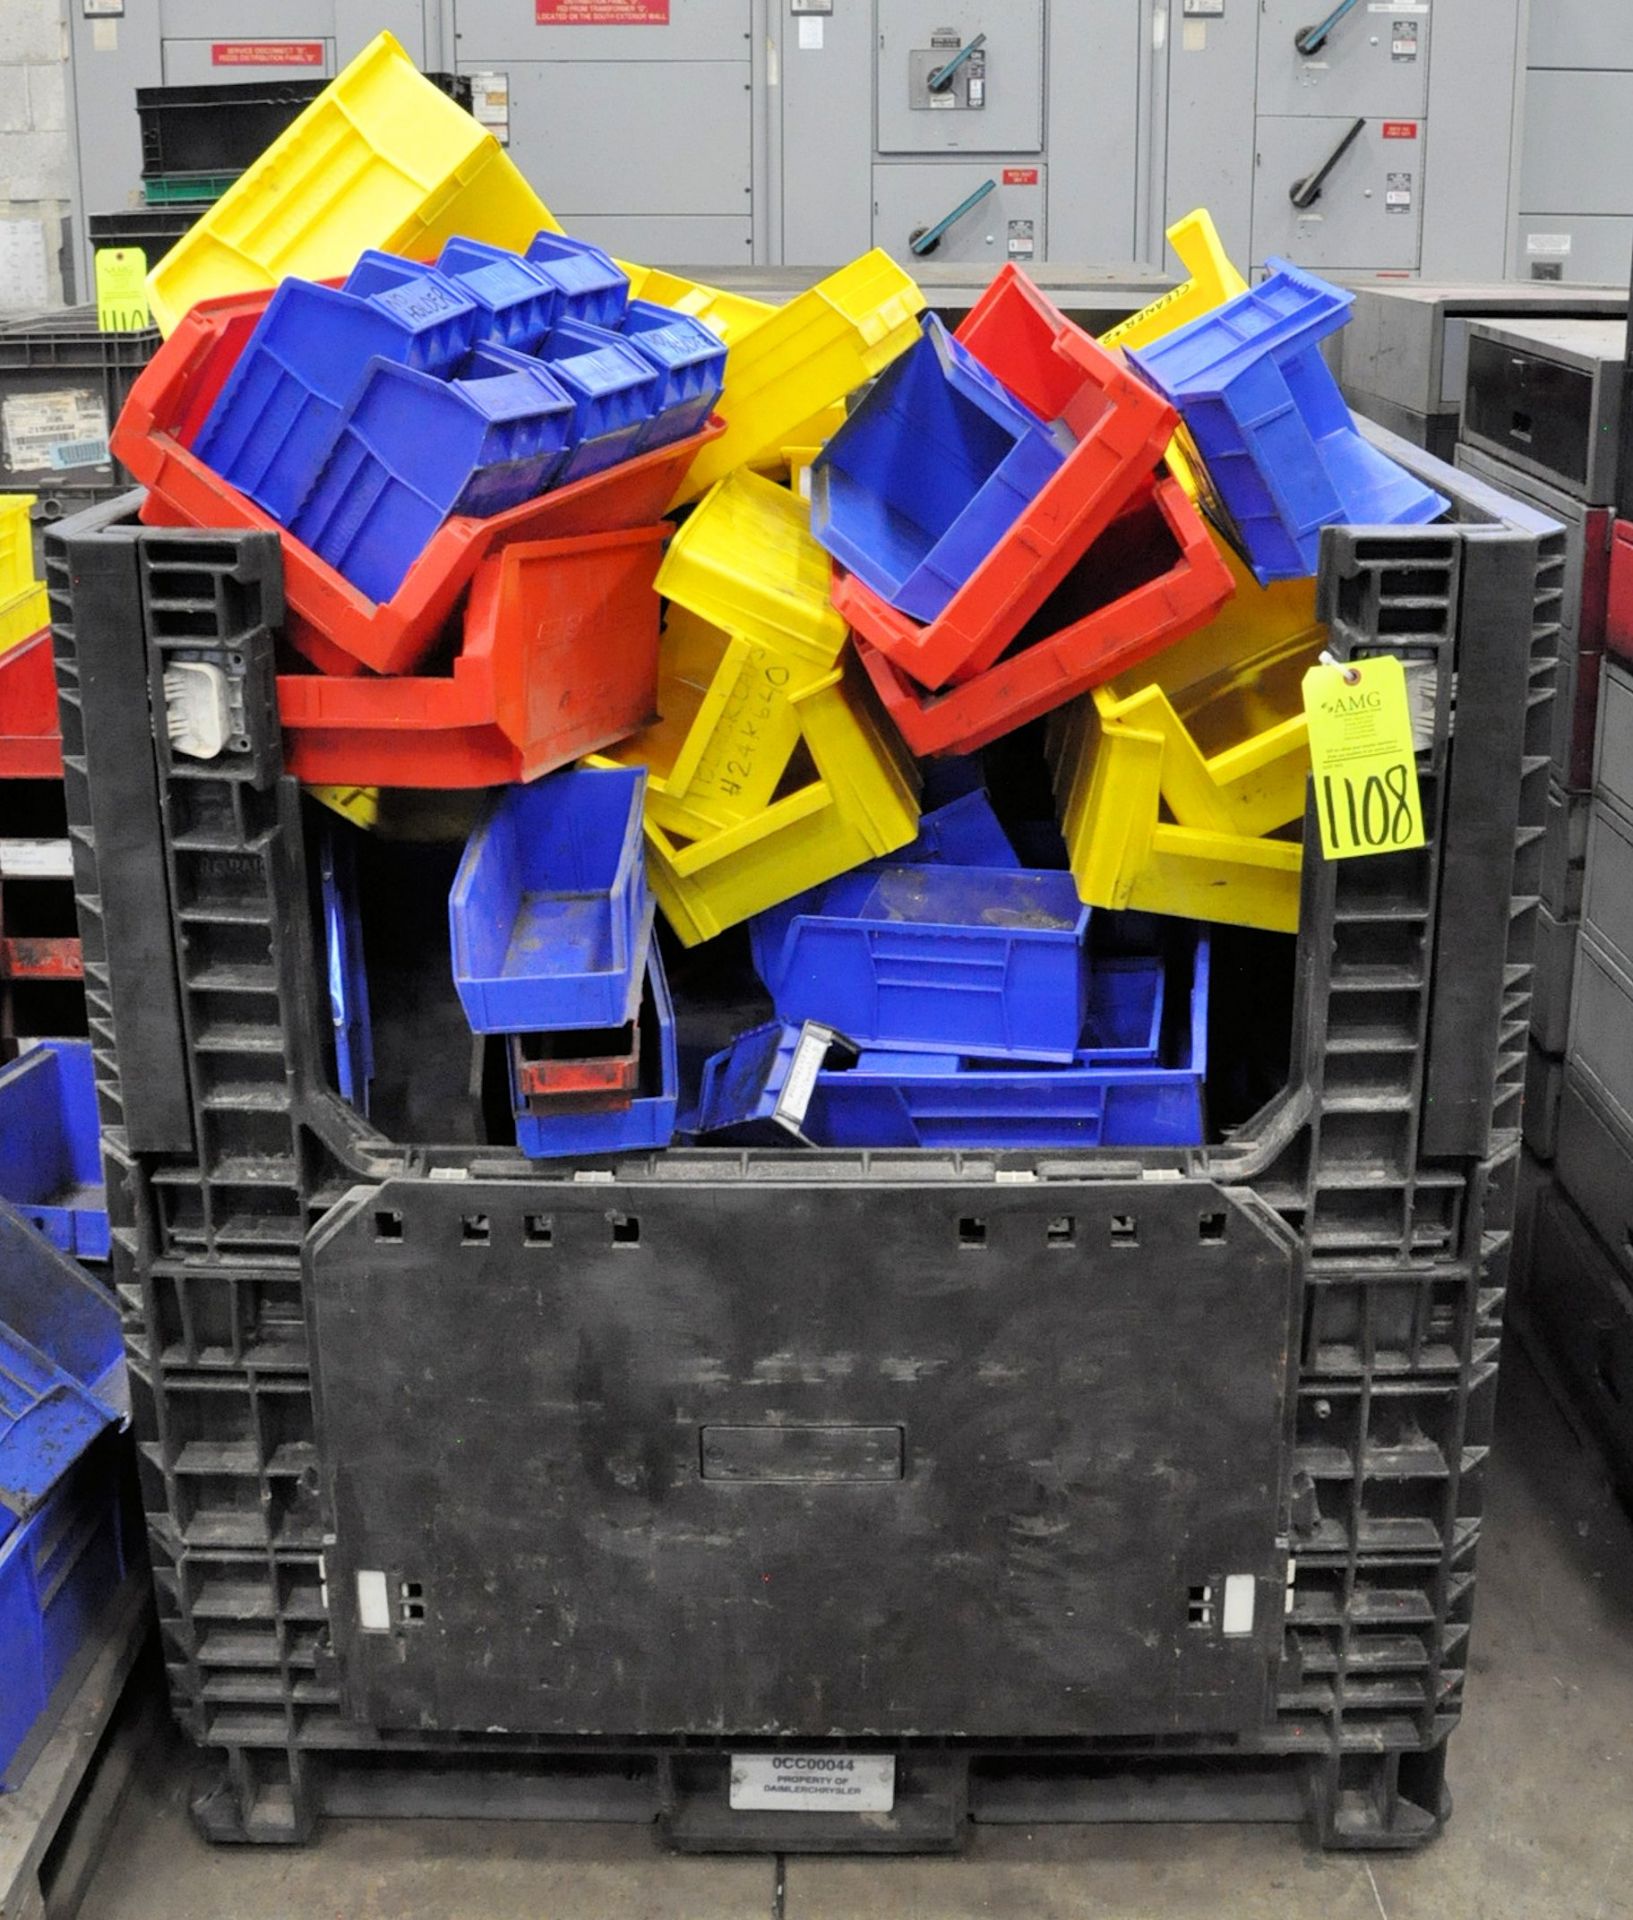 Lot-Plastic Parts Bins in 1-Collapsible Tub, (G-14), (Yellow Tag)